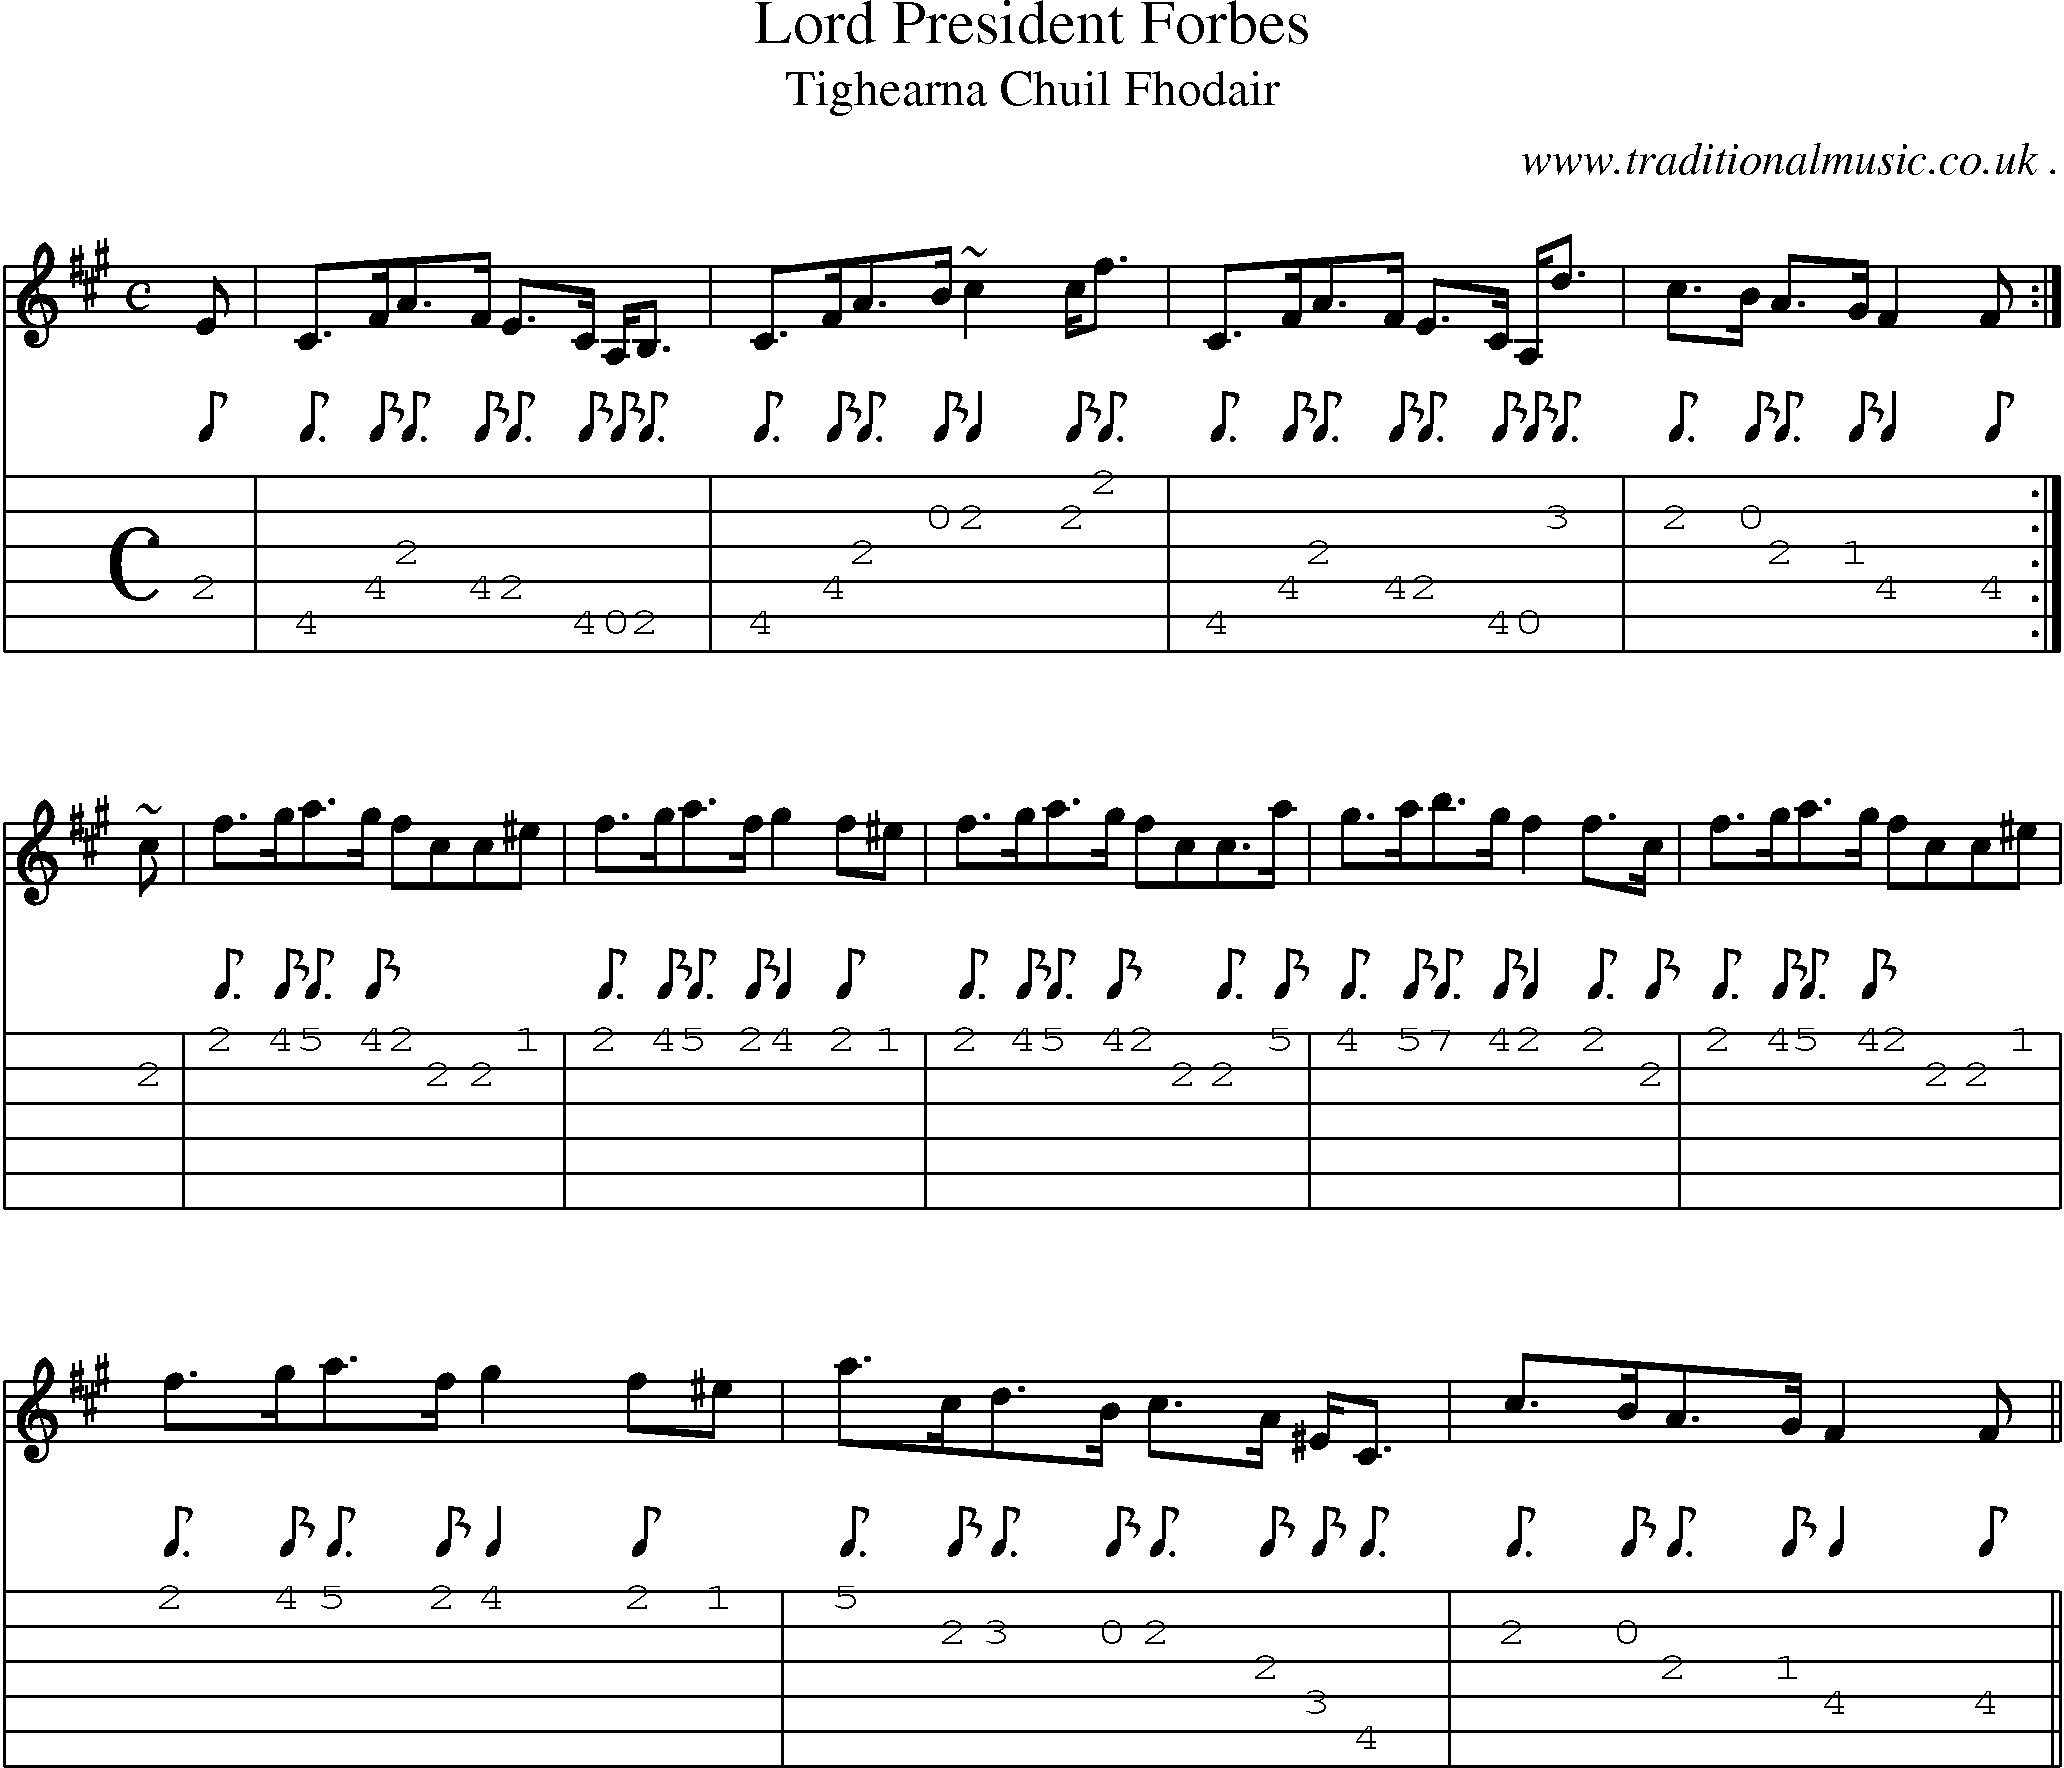 Sheet-music  score, Chords and Guitar Tabs for Lord President Forbes